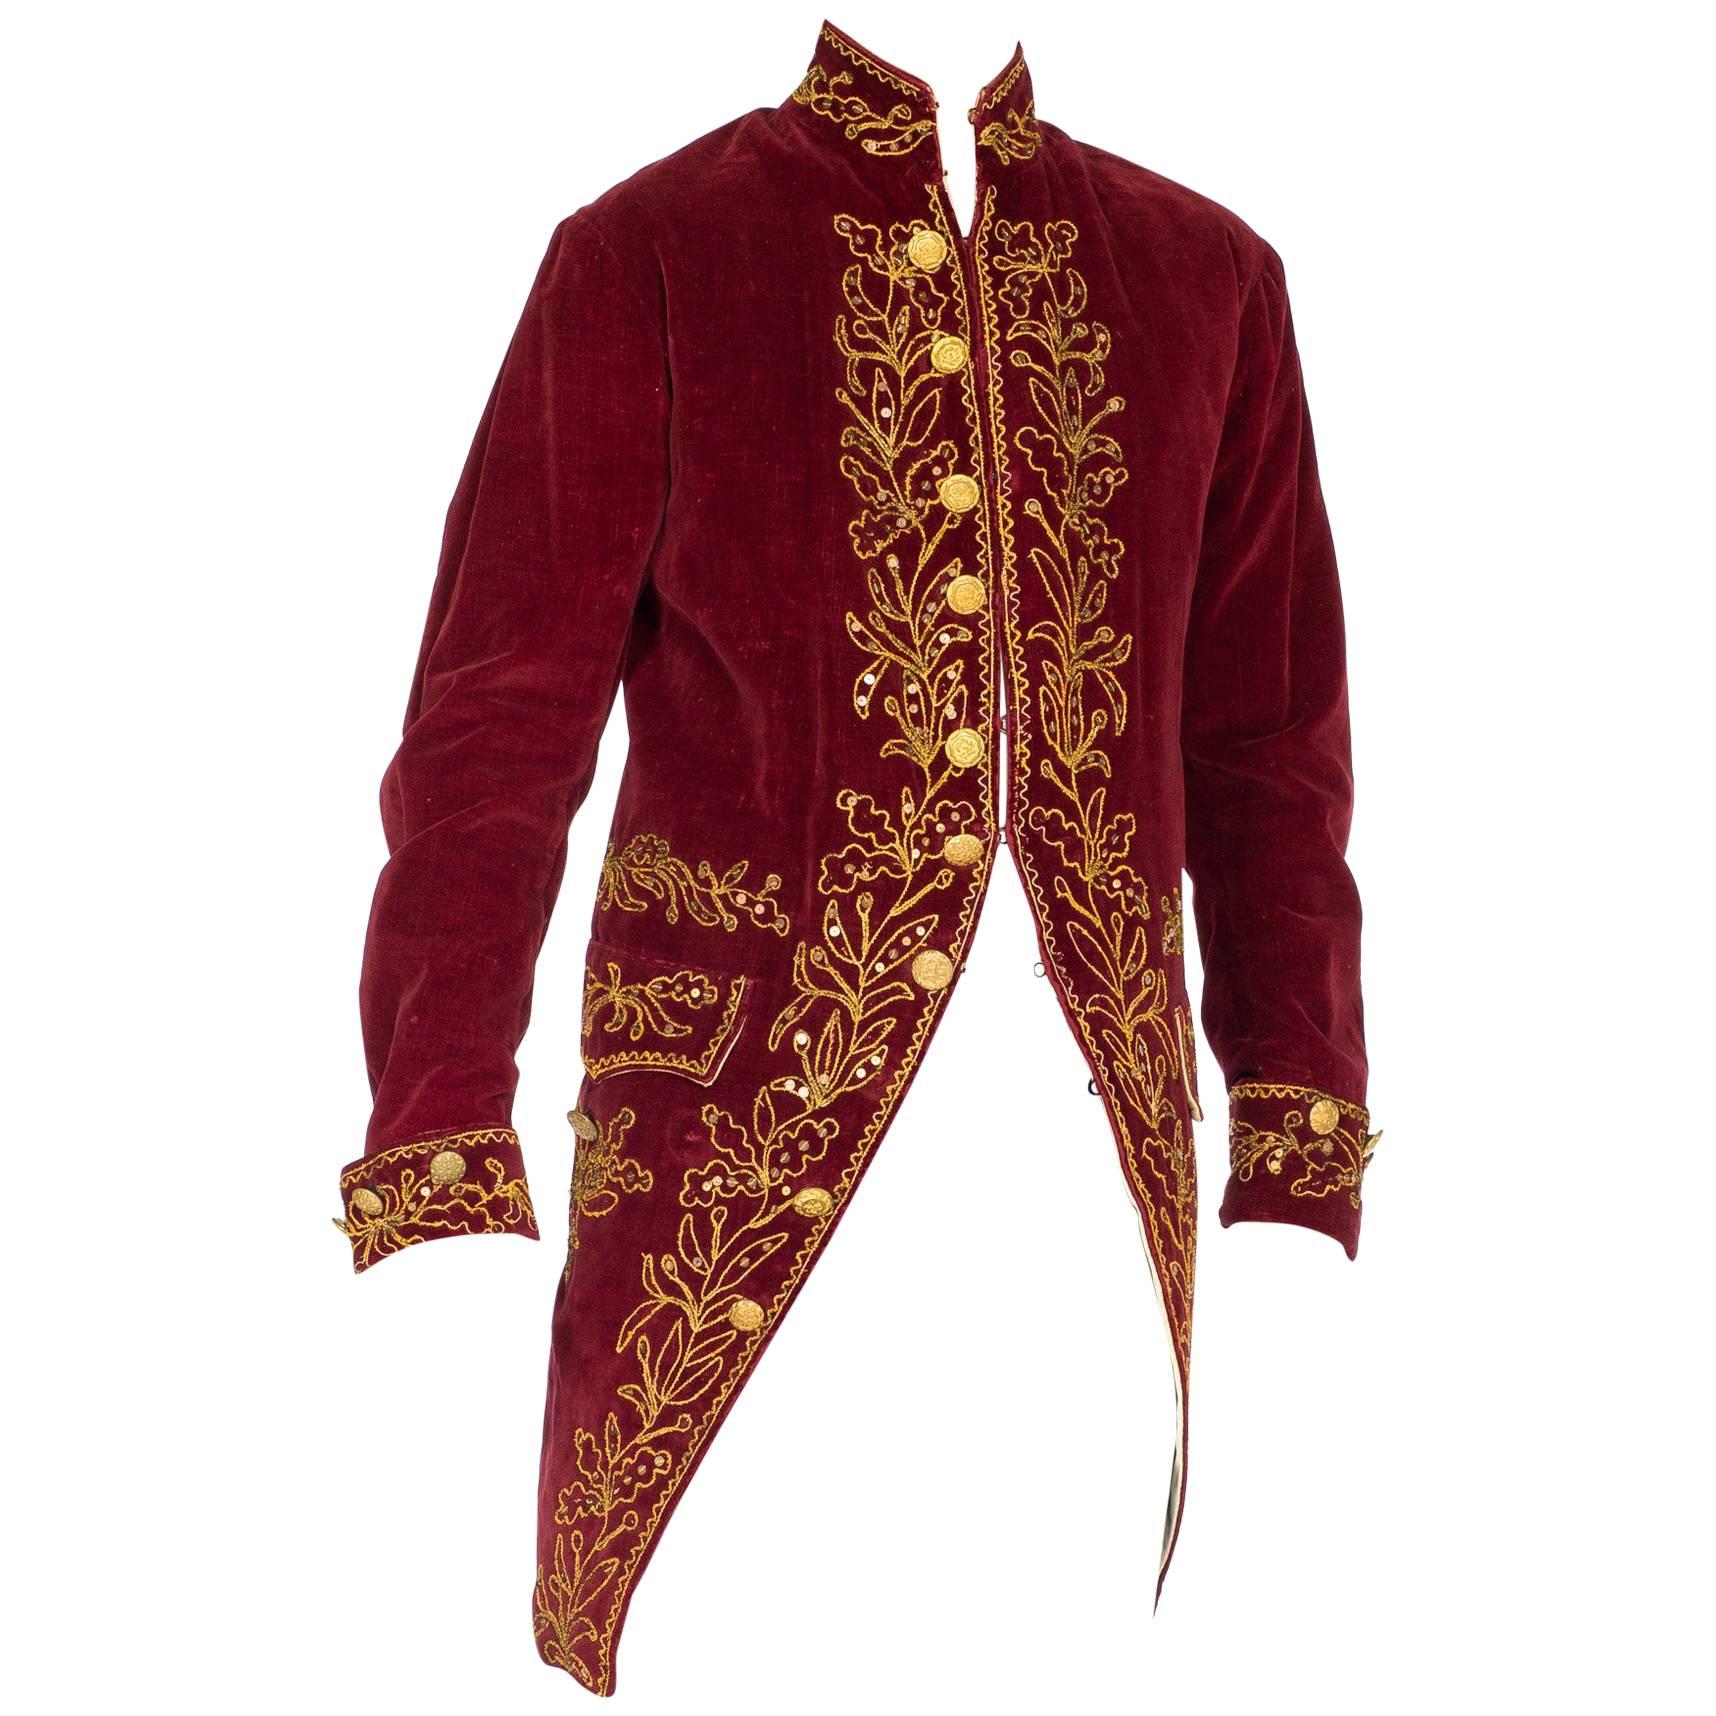 Antique 18th Century Style Velvet Victorian Frock Coat with Gold Embroidery